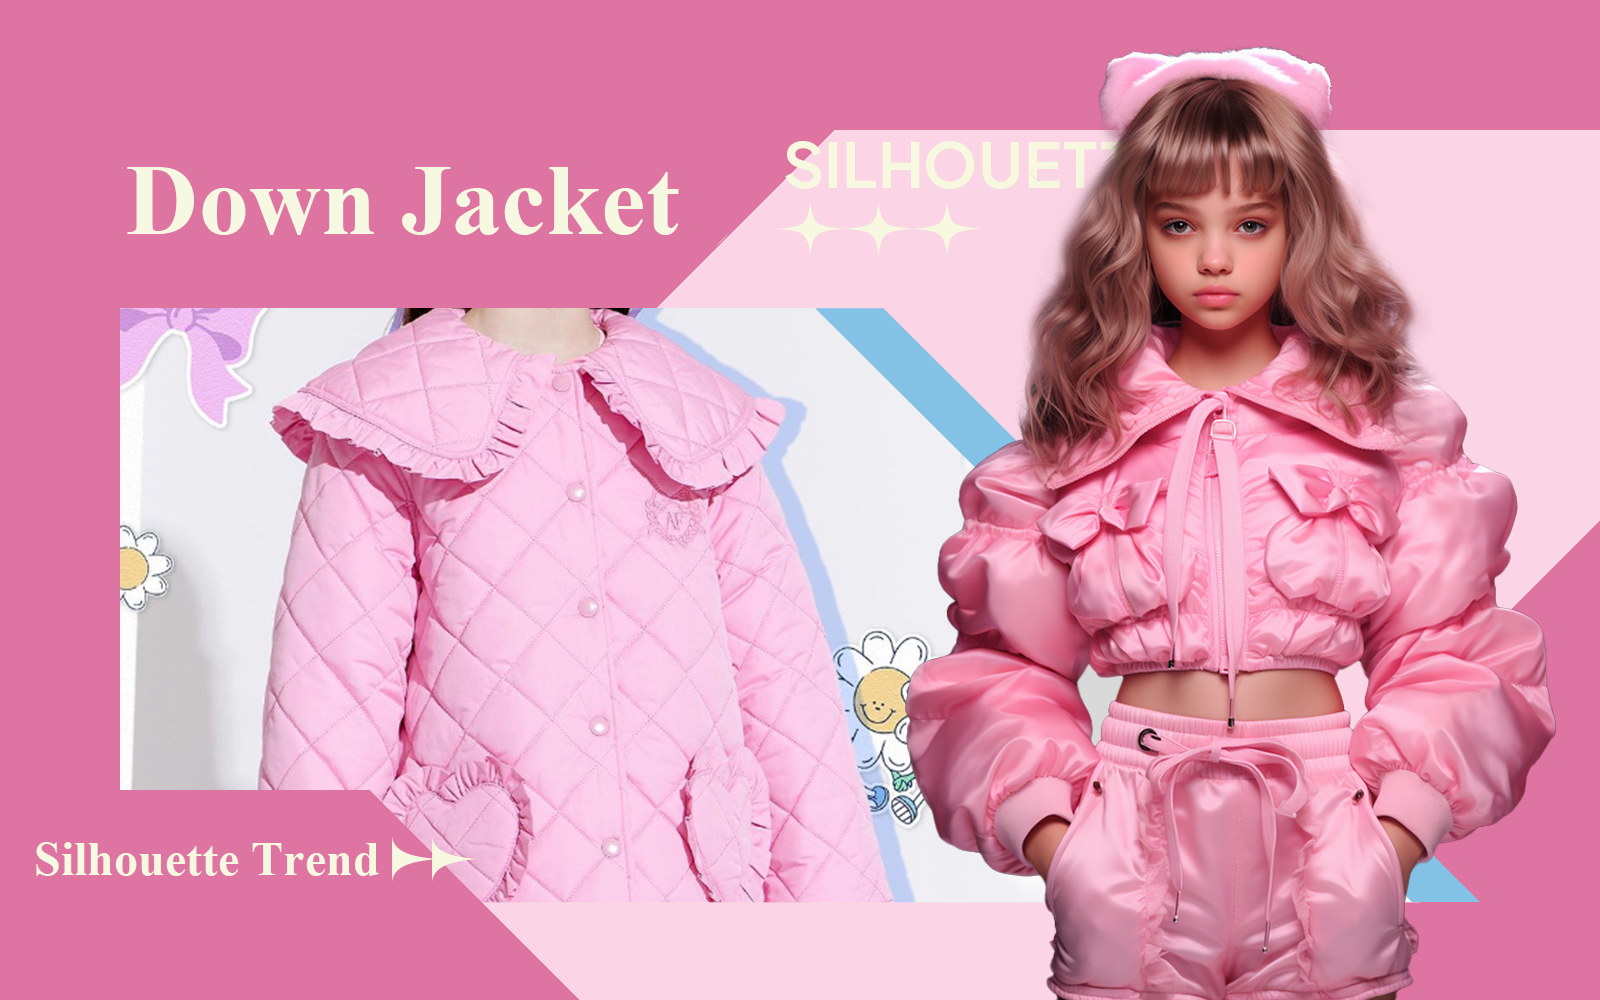 Down Jacket -- The Silhouette Trend for Girlswear